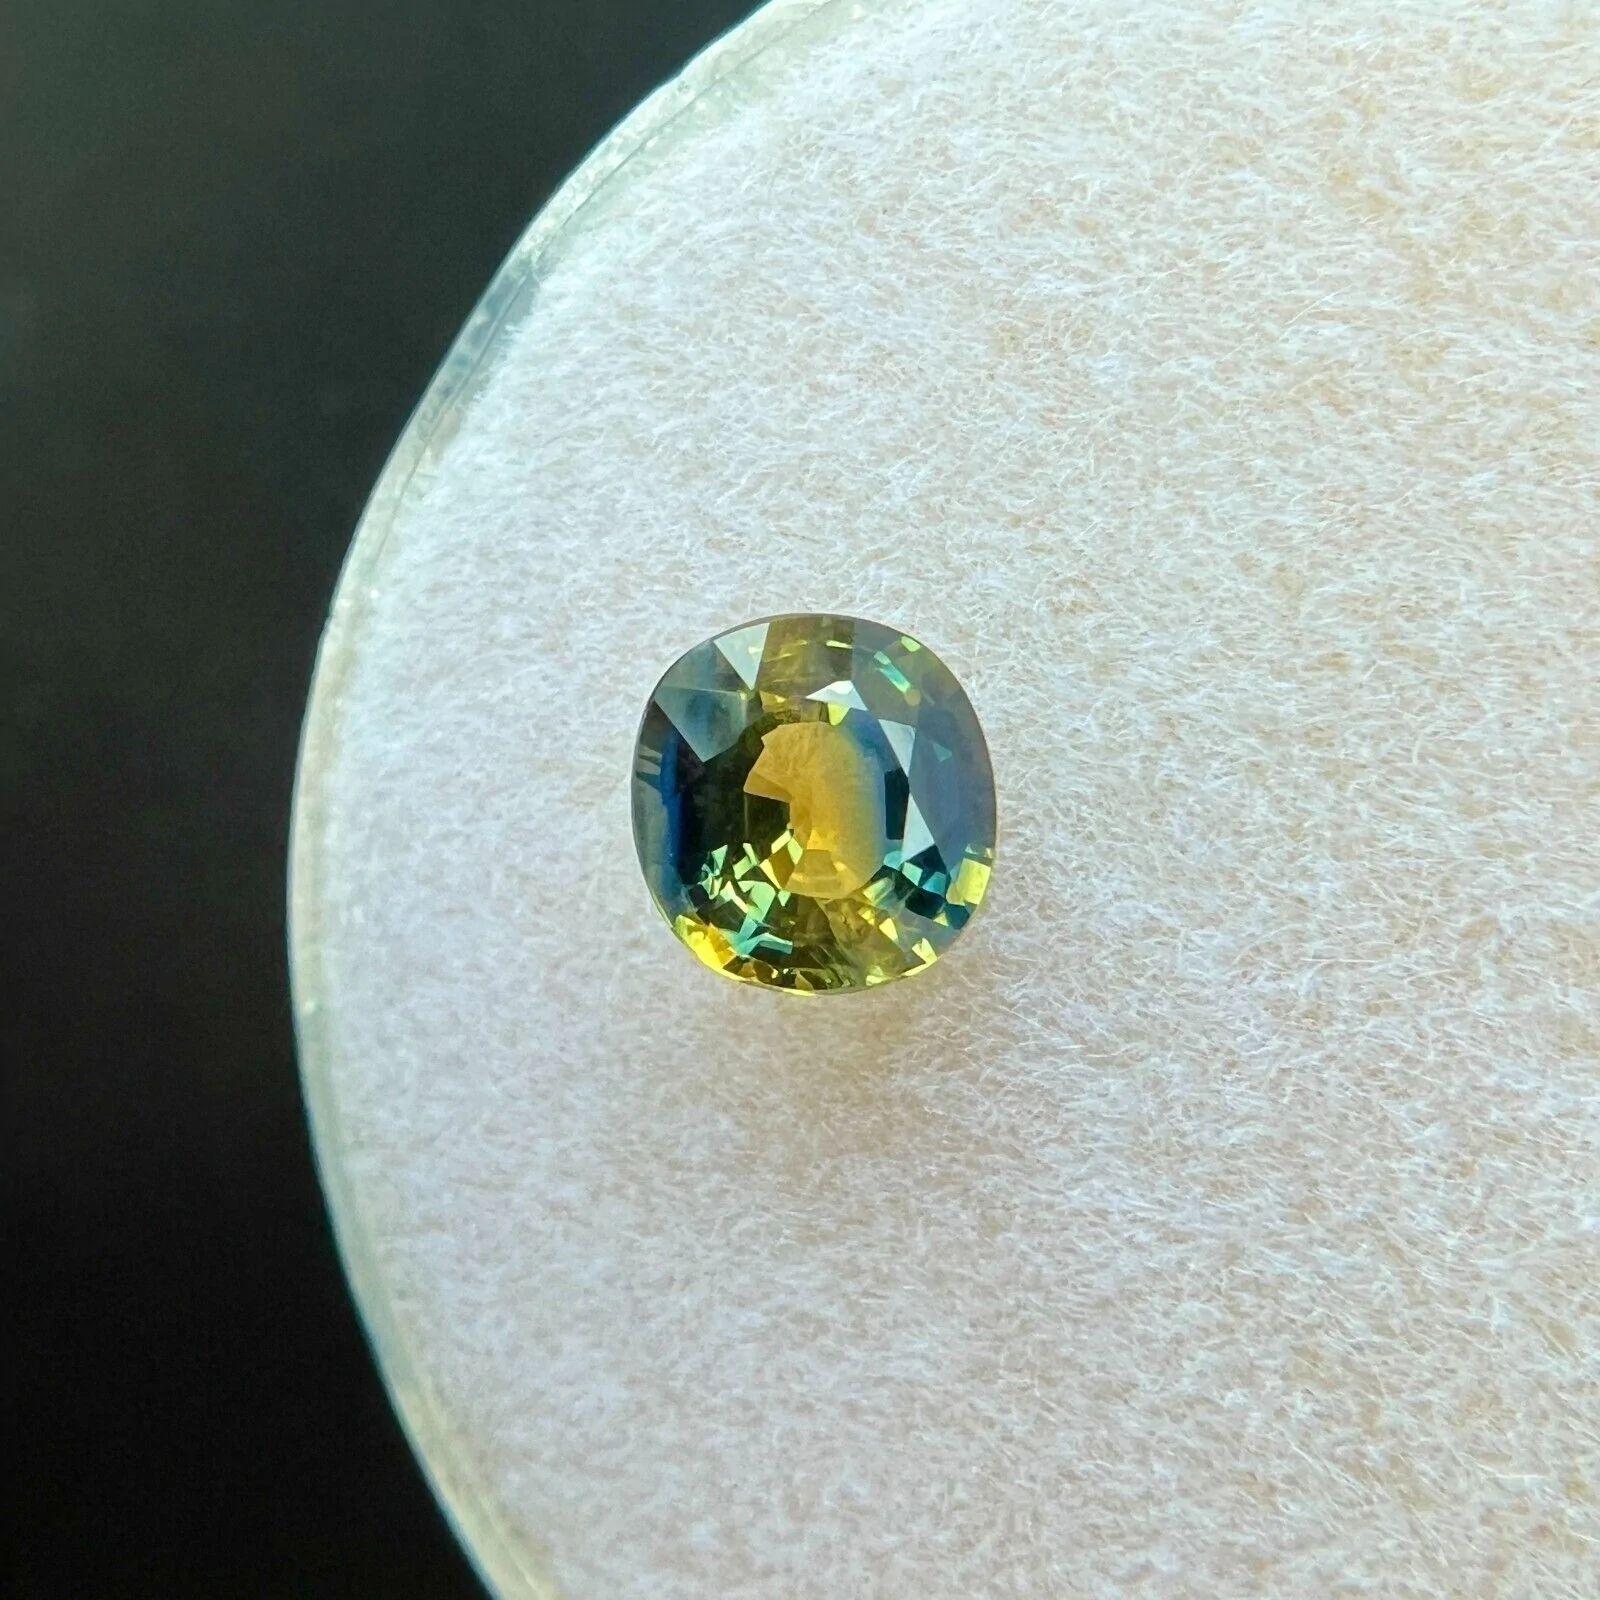 blue and yellow gems